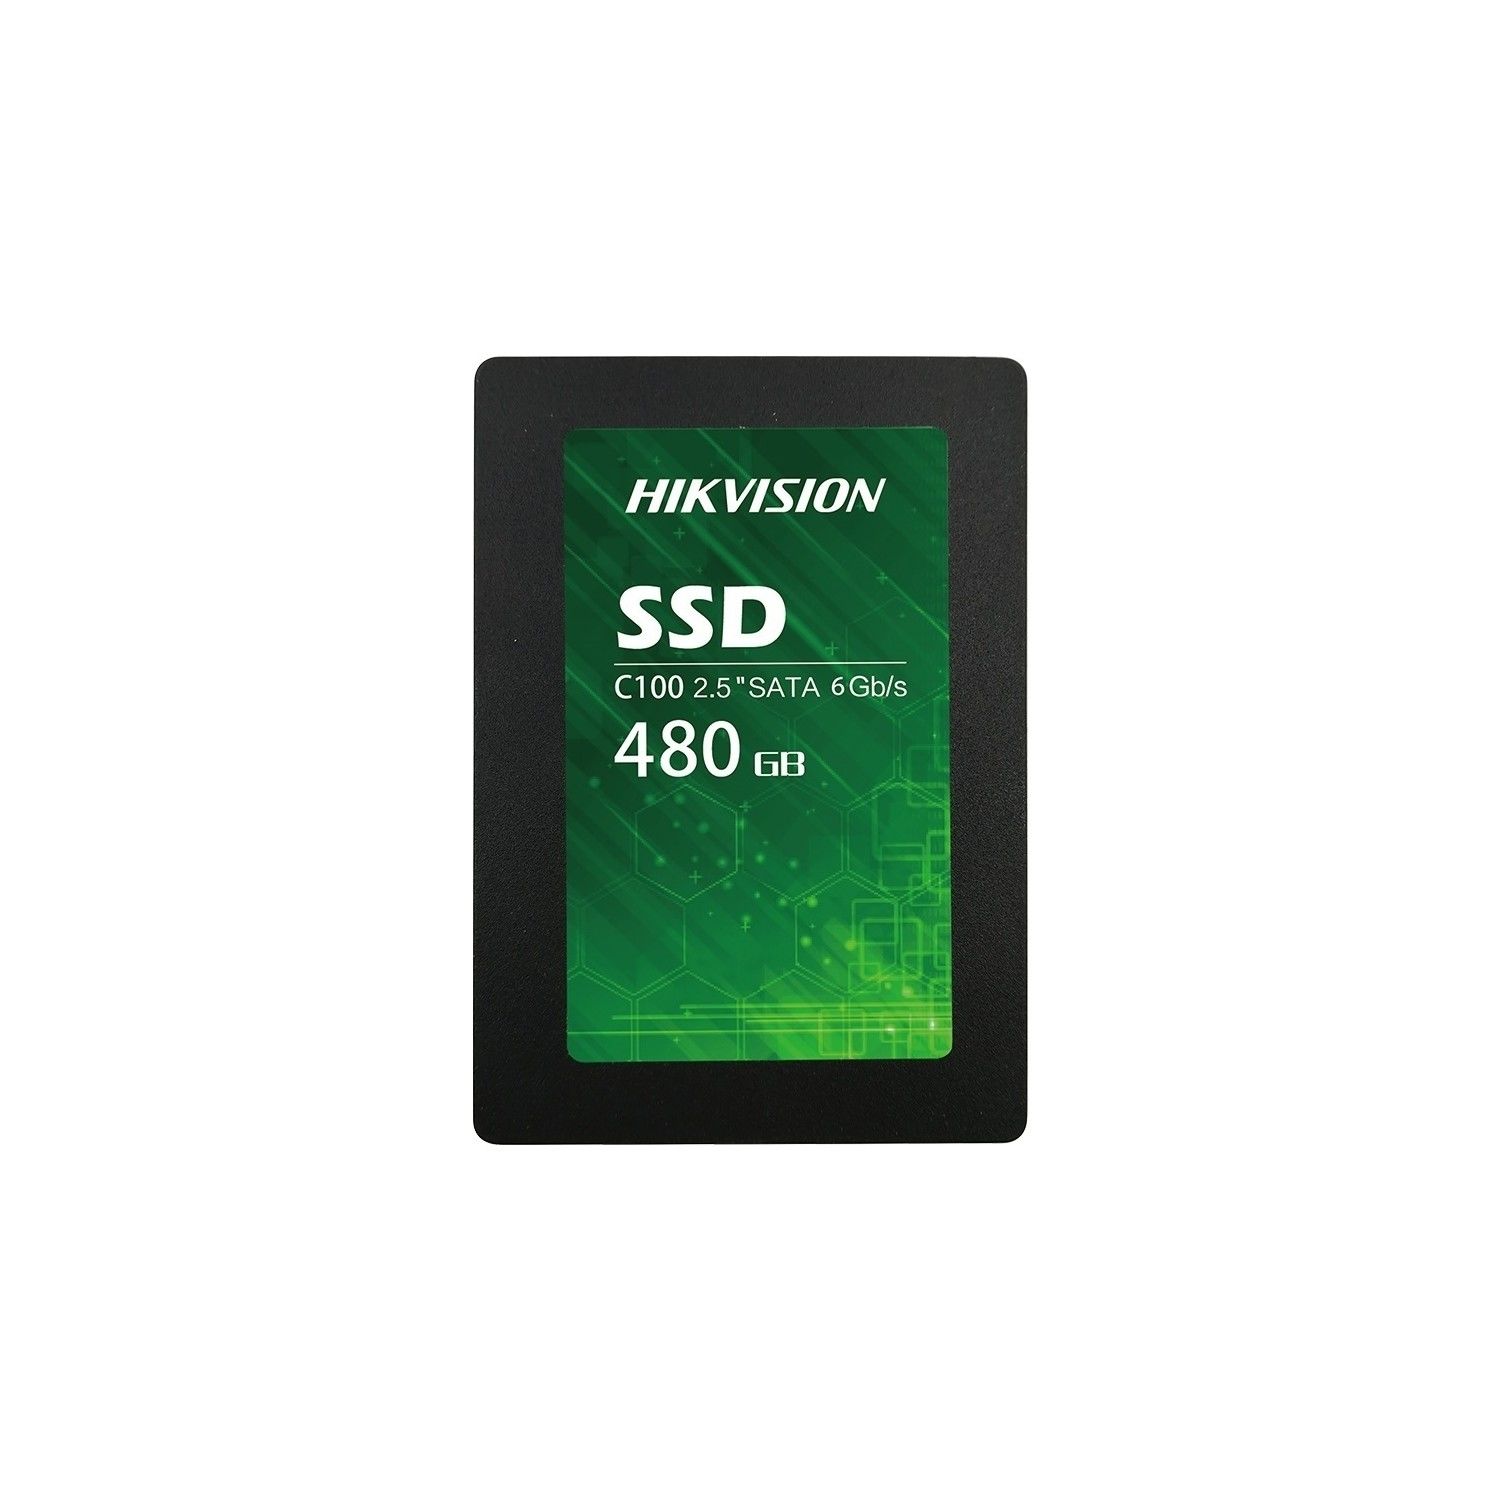 HIKVISION 480GB SSD3 Hs-Ssd-C100/480G 550Mb/470Mb